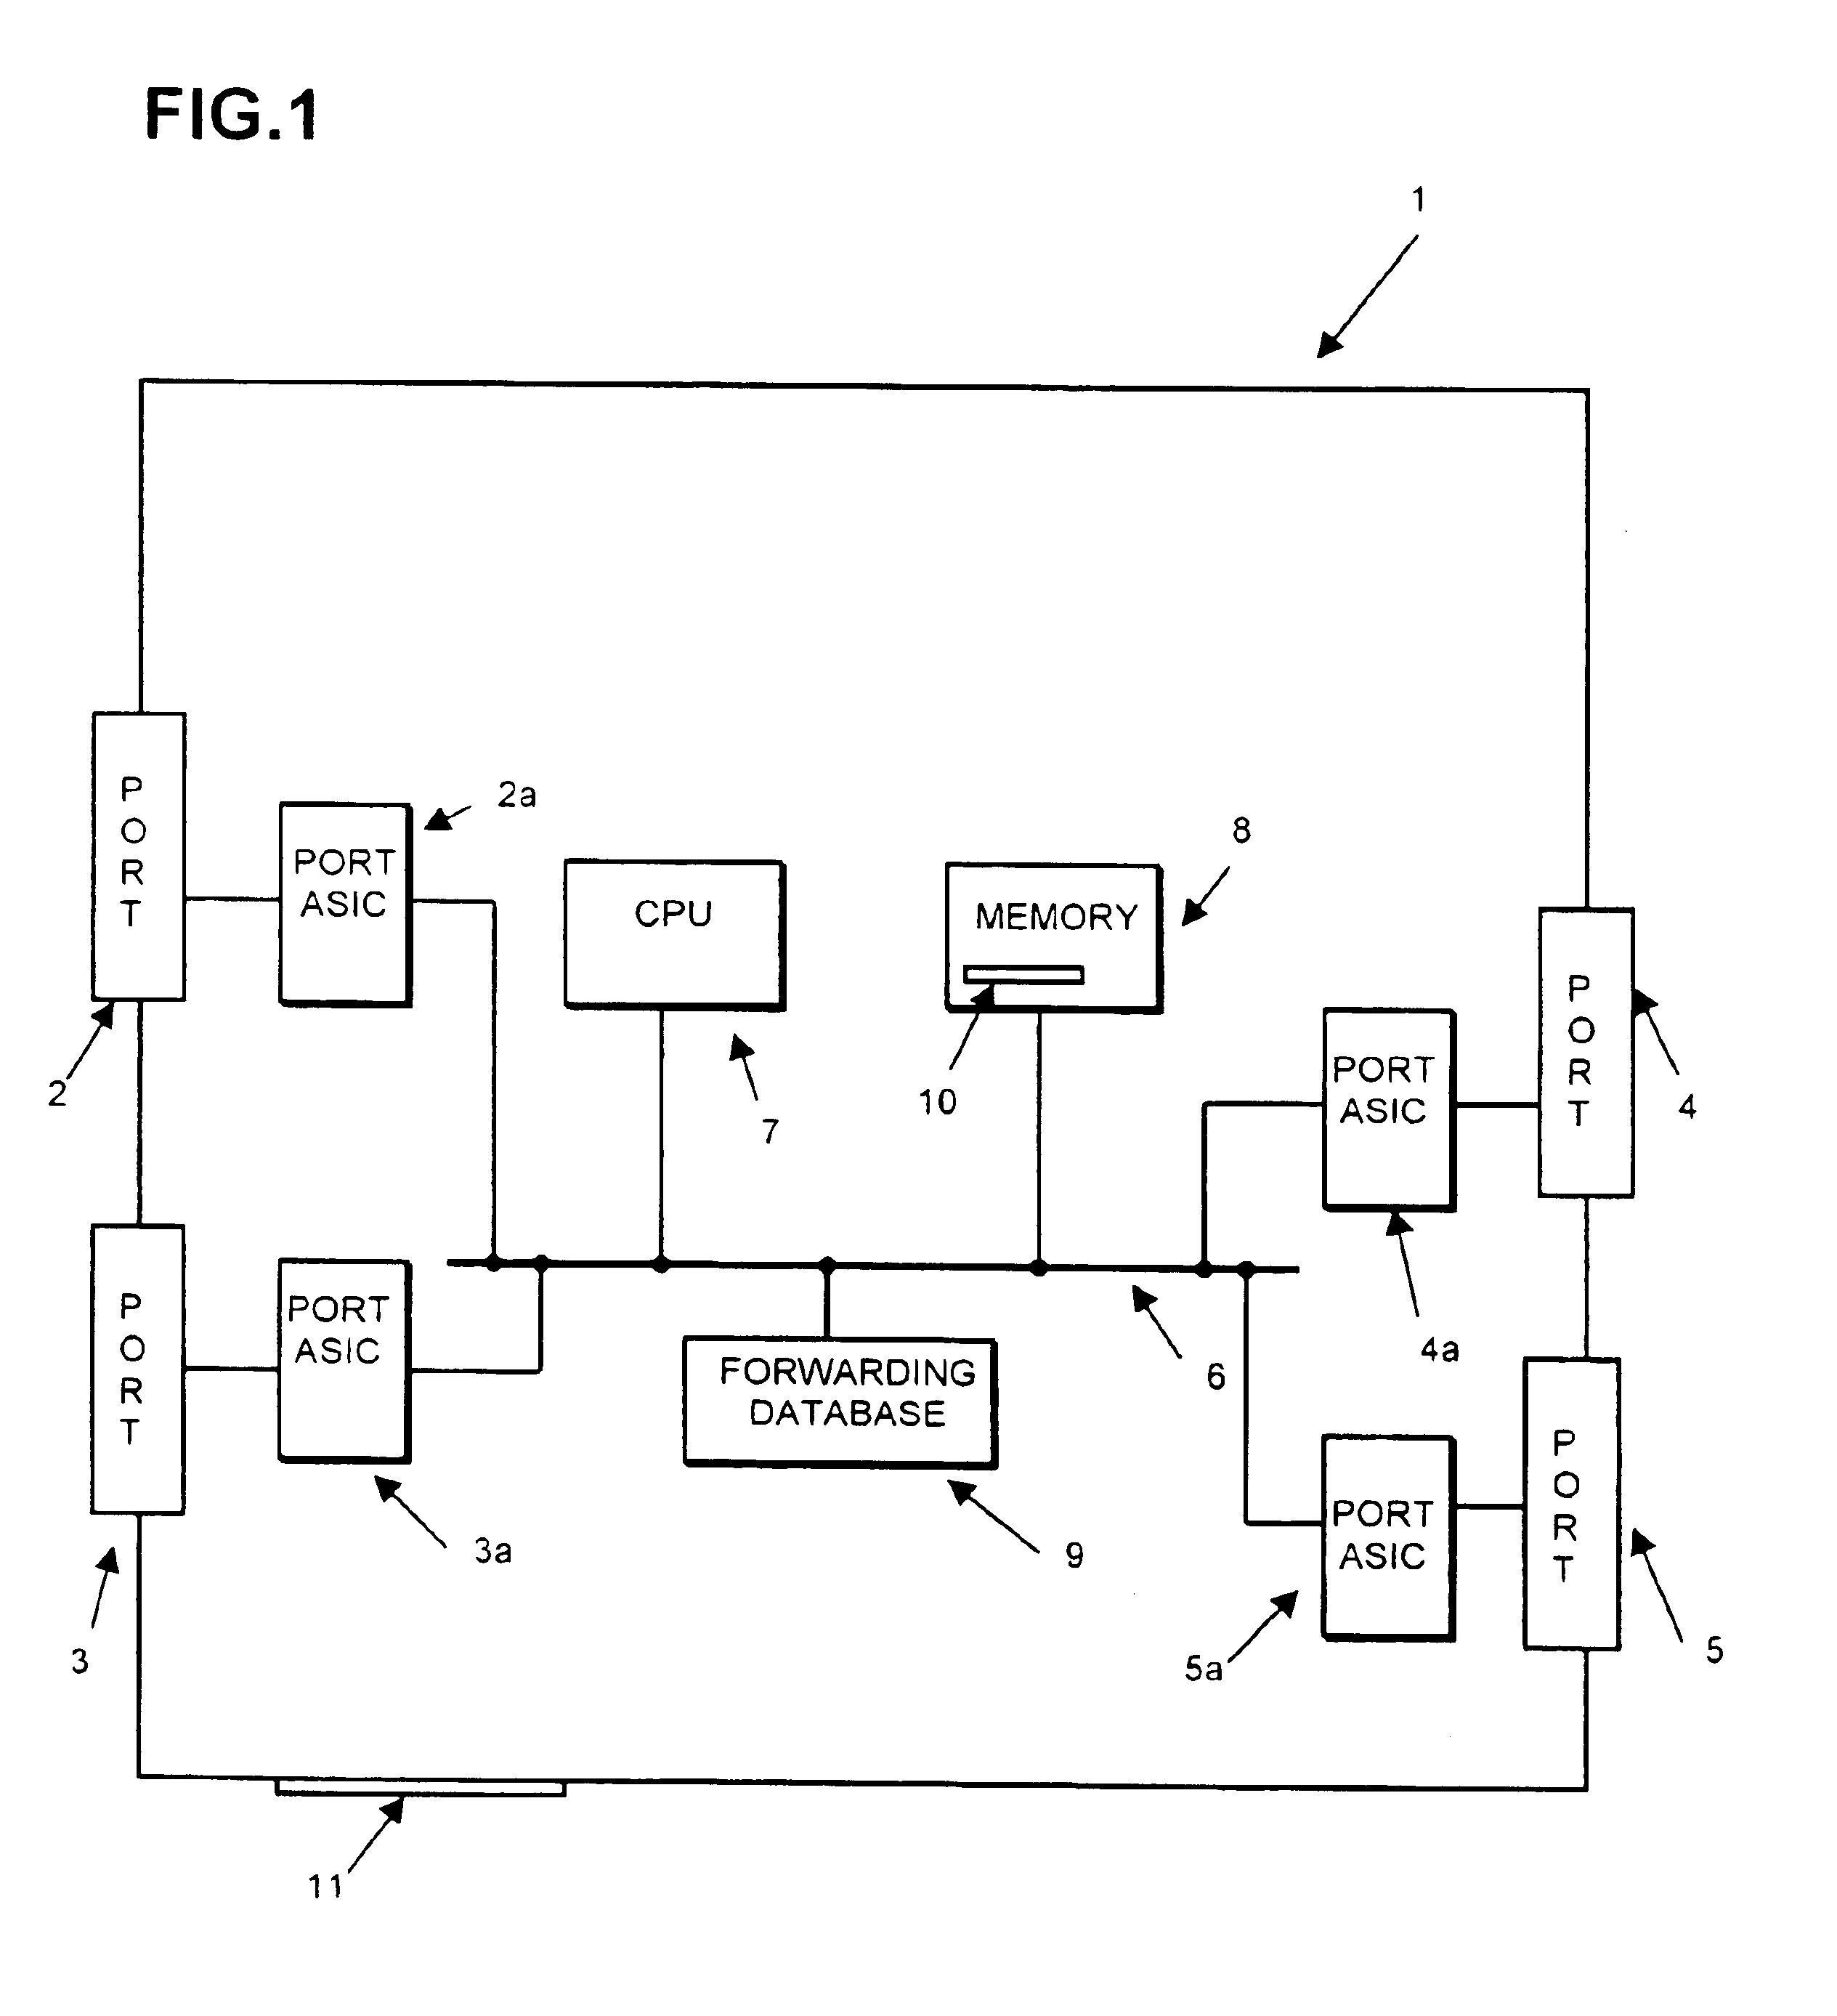 Method for secure installation of device in packet based communication network